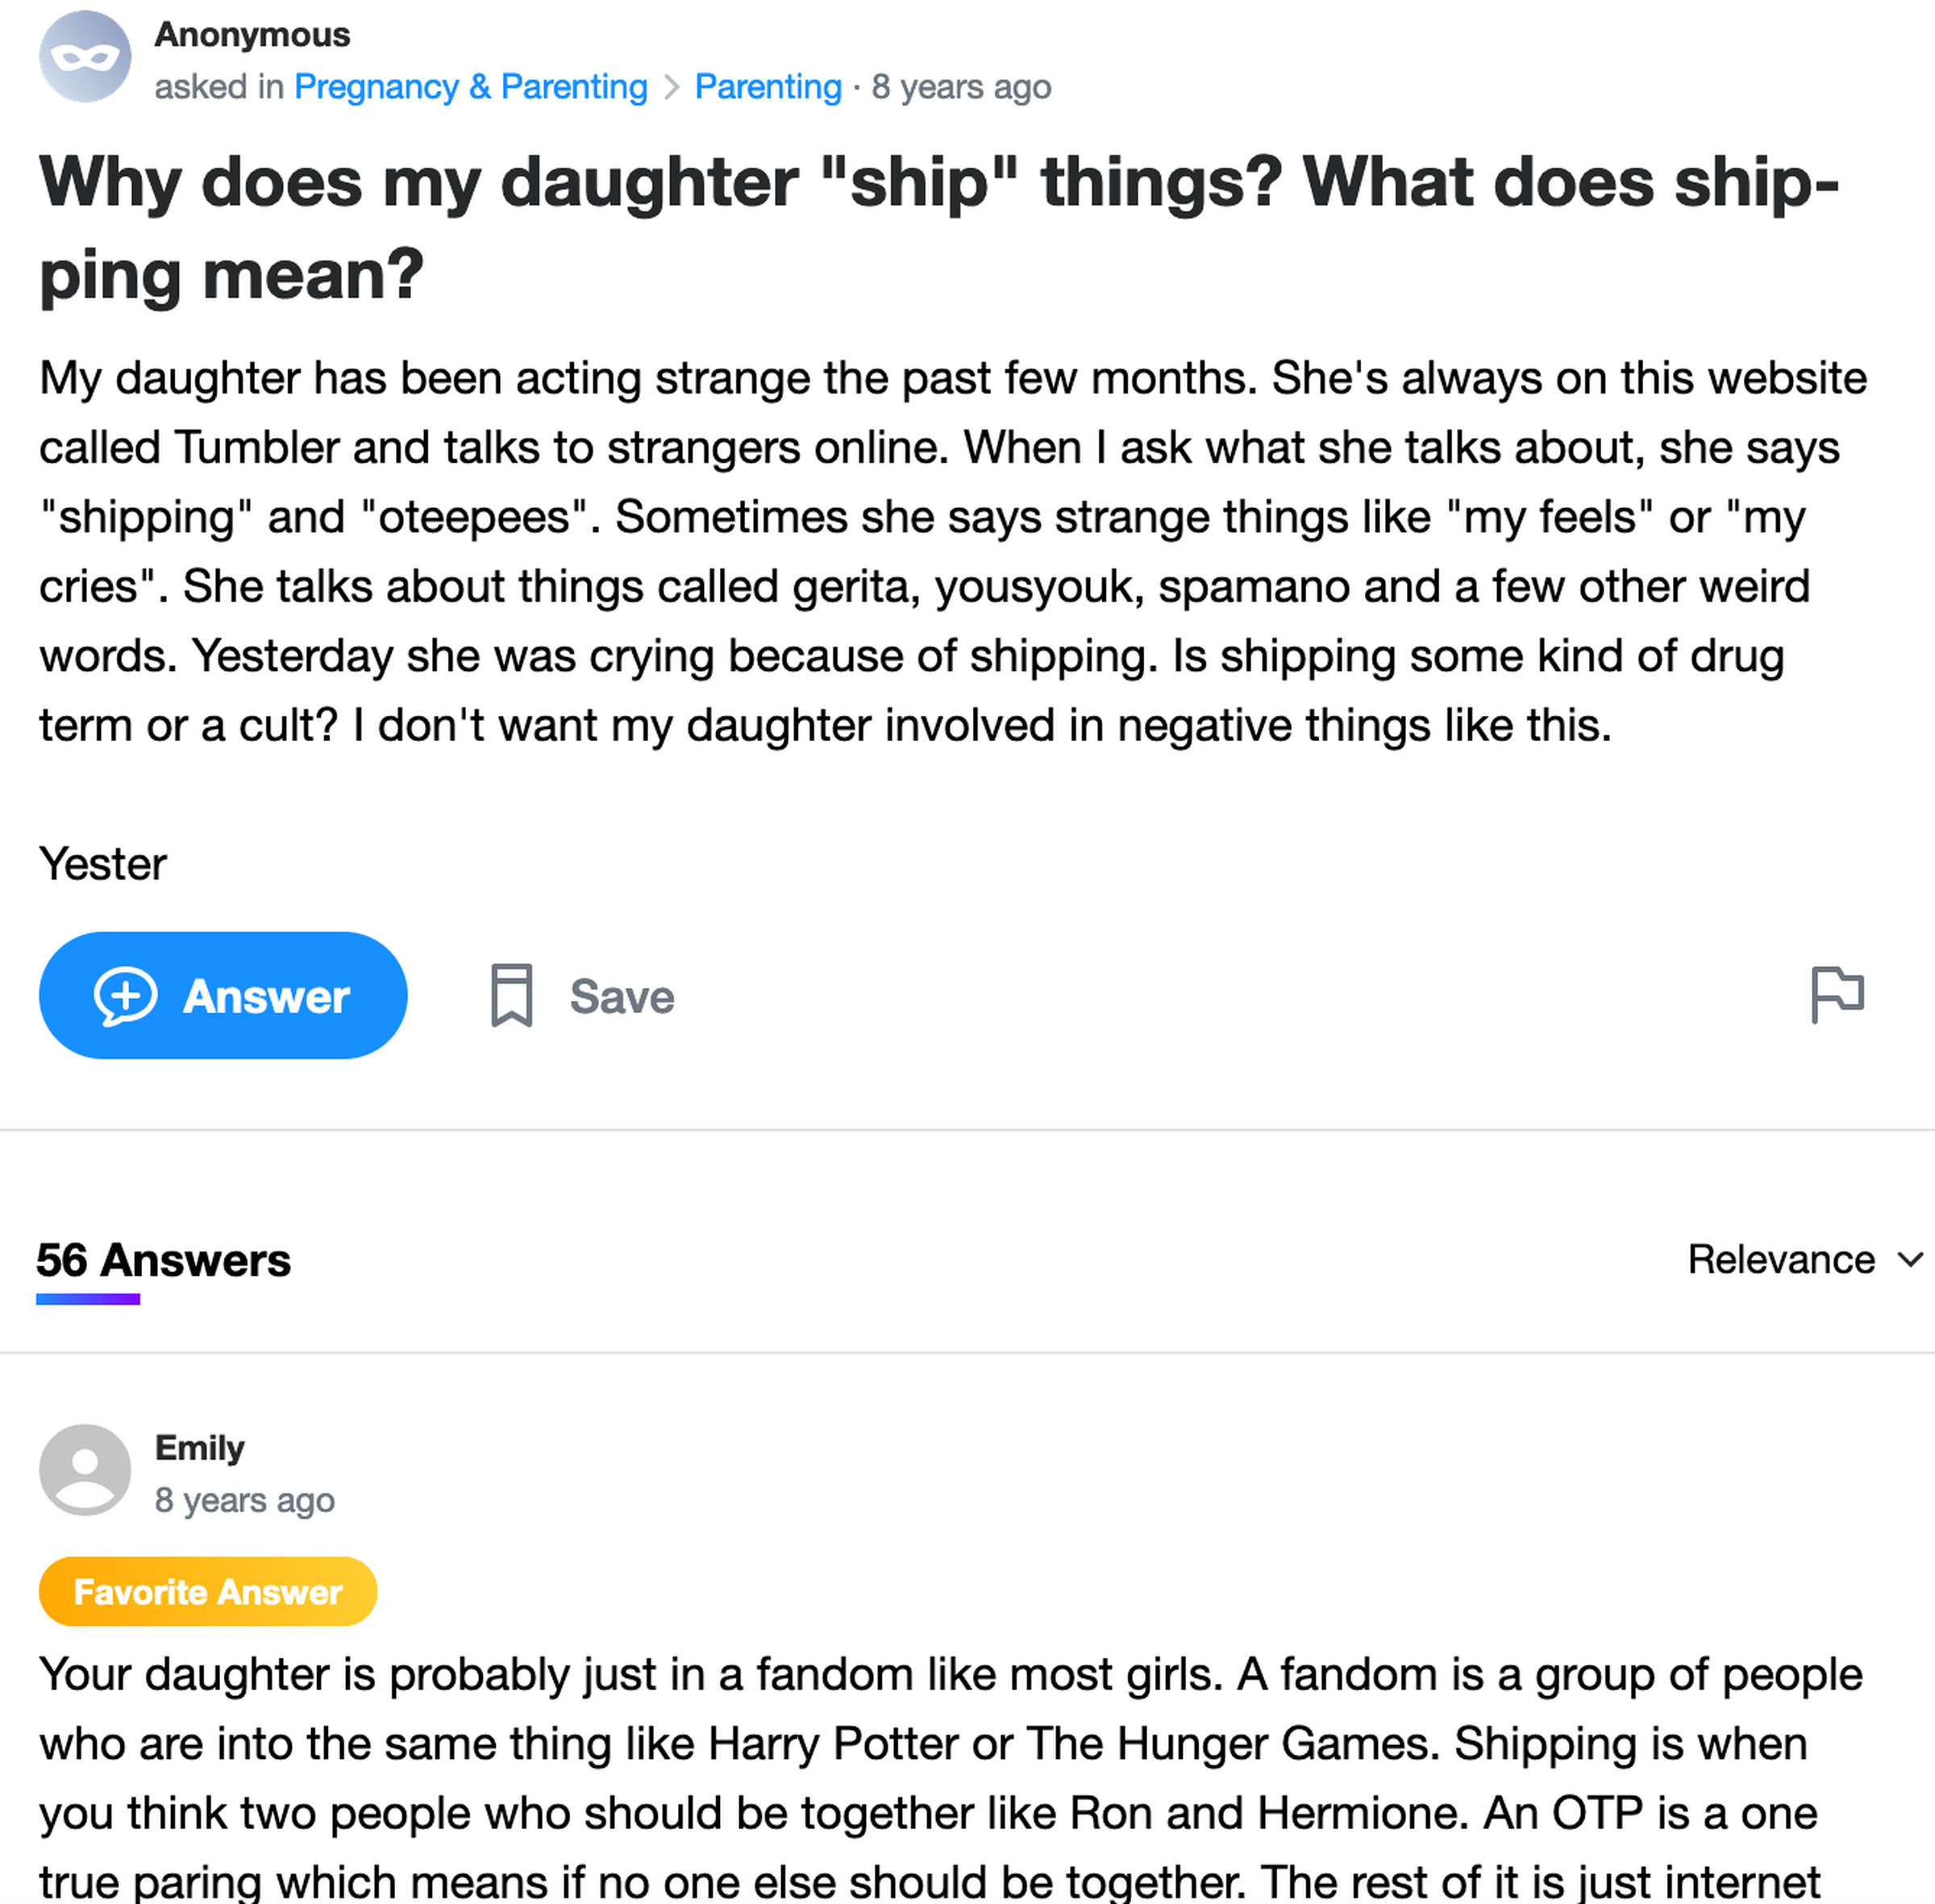 Yahoo Answers post: Why does my daughter “ship” things? What does shipping mean? My daughter has been acting strange the past few months. She’s always on this website called Tumbler and talks to strangers online. When I ask what she talks about, she says “shipping” and “oteepees”. Sometimes she says strange things like “my feels” or “my cries”. She talks about things called gerita, yousyouk, spamano and a few other weird words.